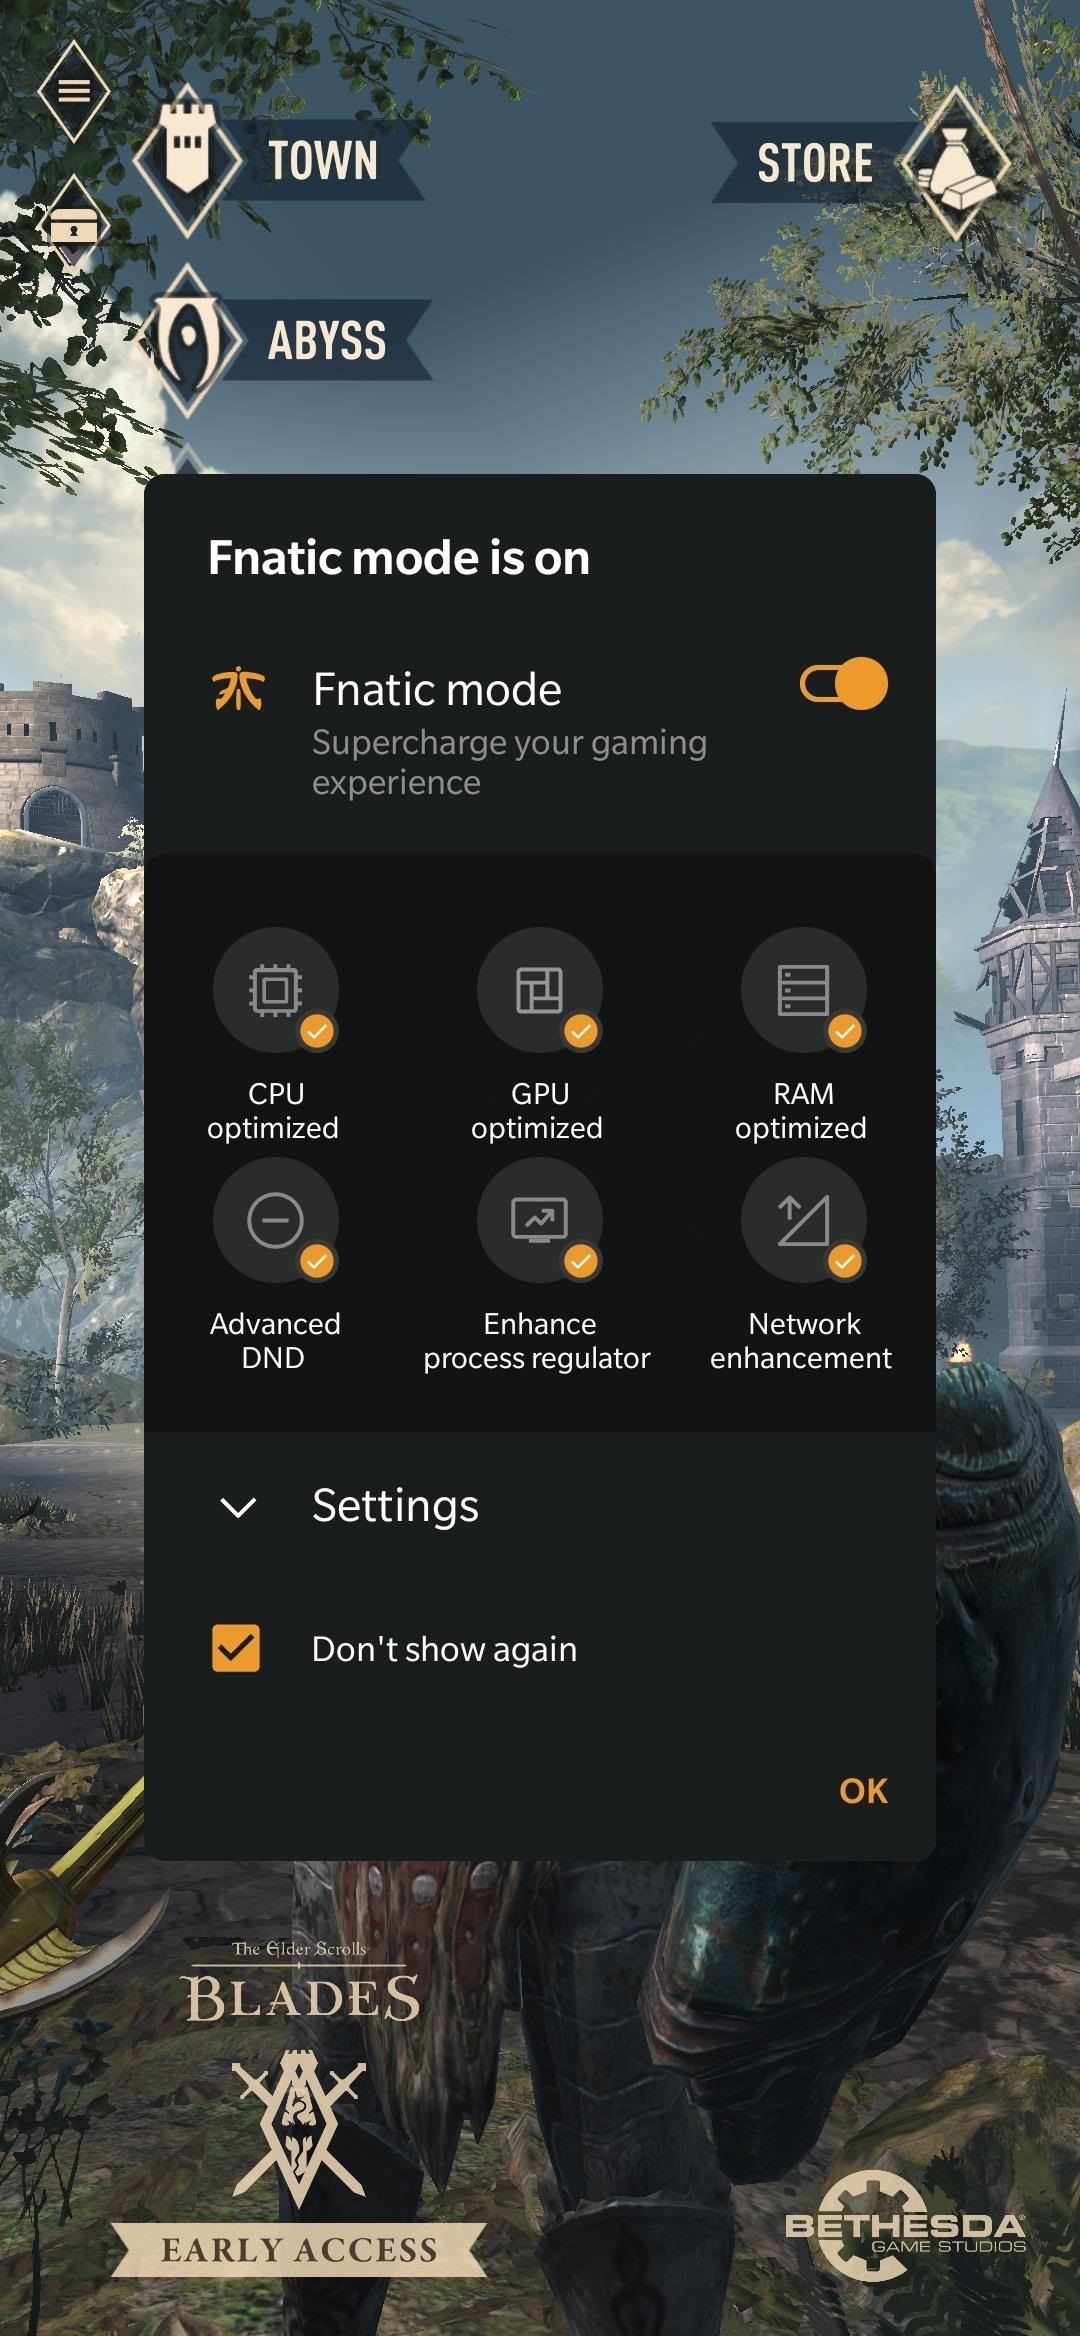 Use Fnatic Mode to Power Up Your OnePlus 7 Pro Gaming Experience